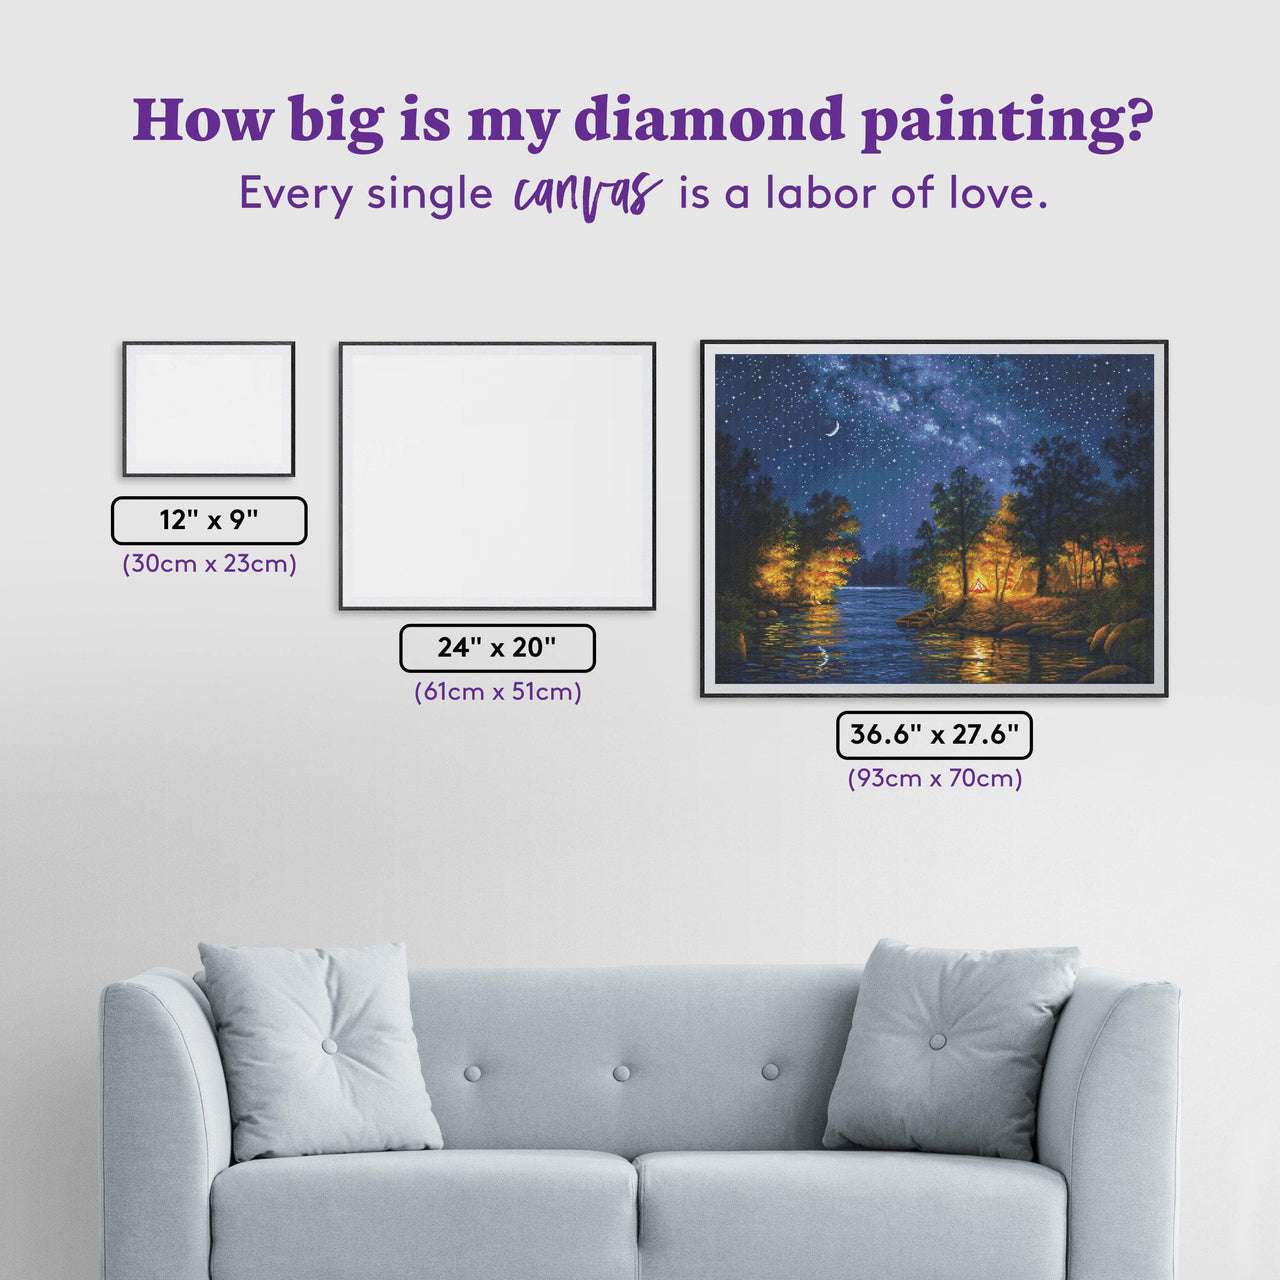 Diamond Painting Evening Melodies 36.6" x 27.6″ (93cm x 70cm) / Square with 31 Colors including 2 ABs / 102,213